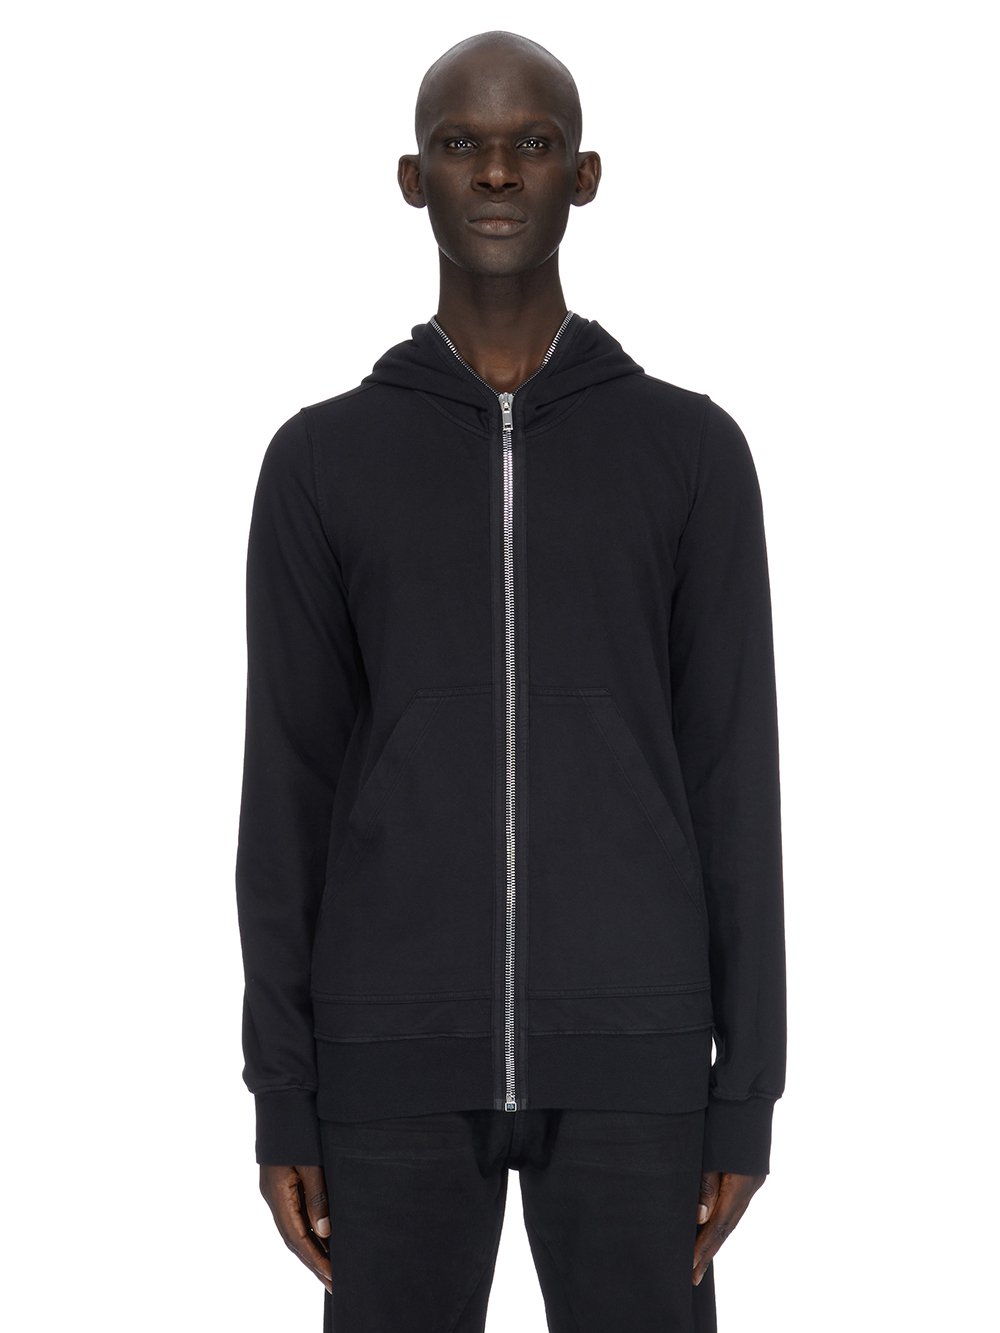 DRKSHDW FW23 LUXOR GIMP HOODIE IN BLACK COMPACT HEAVY COTTON JERSEY